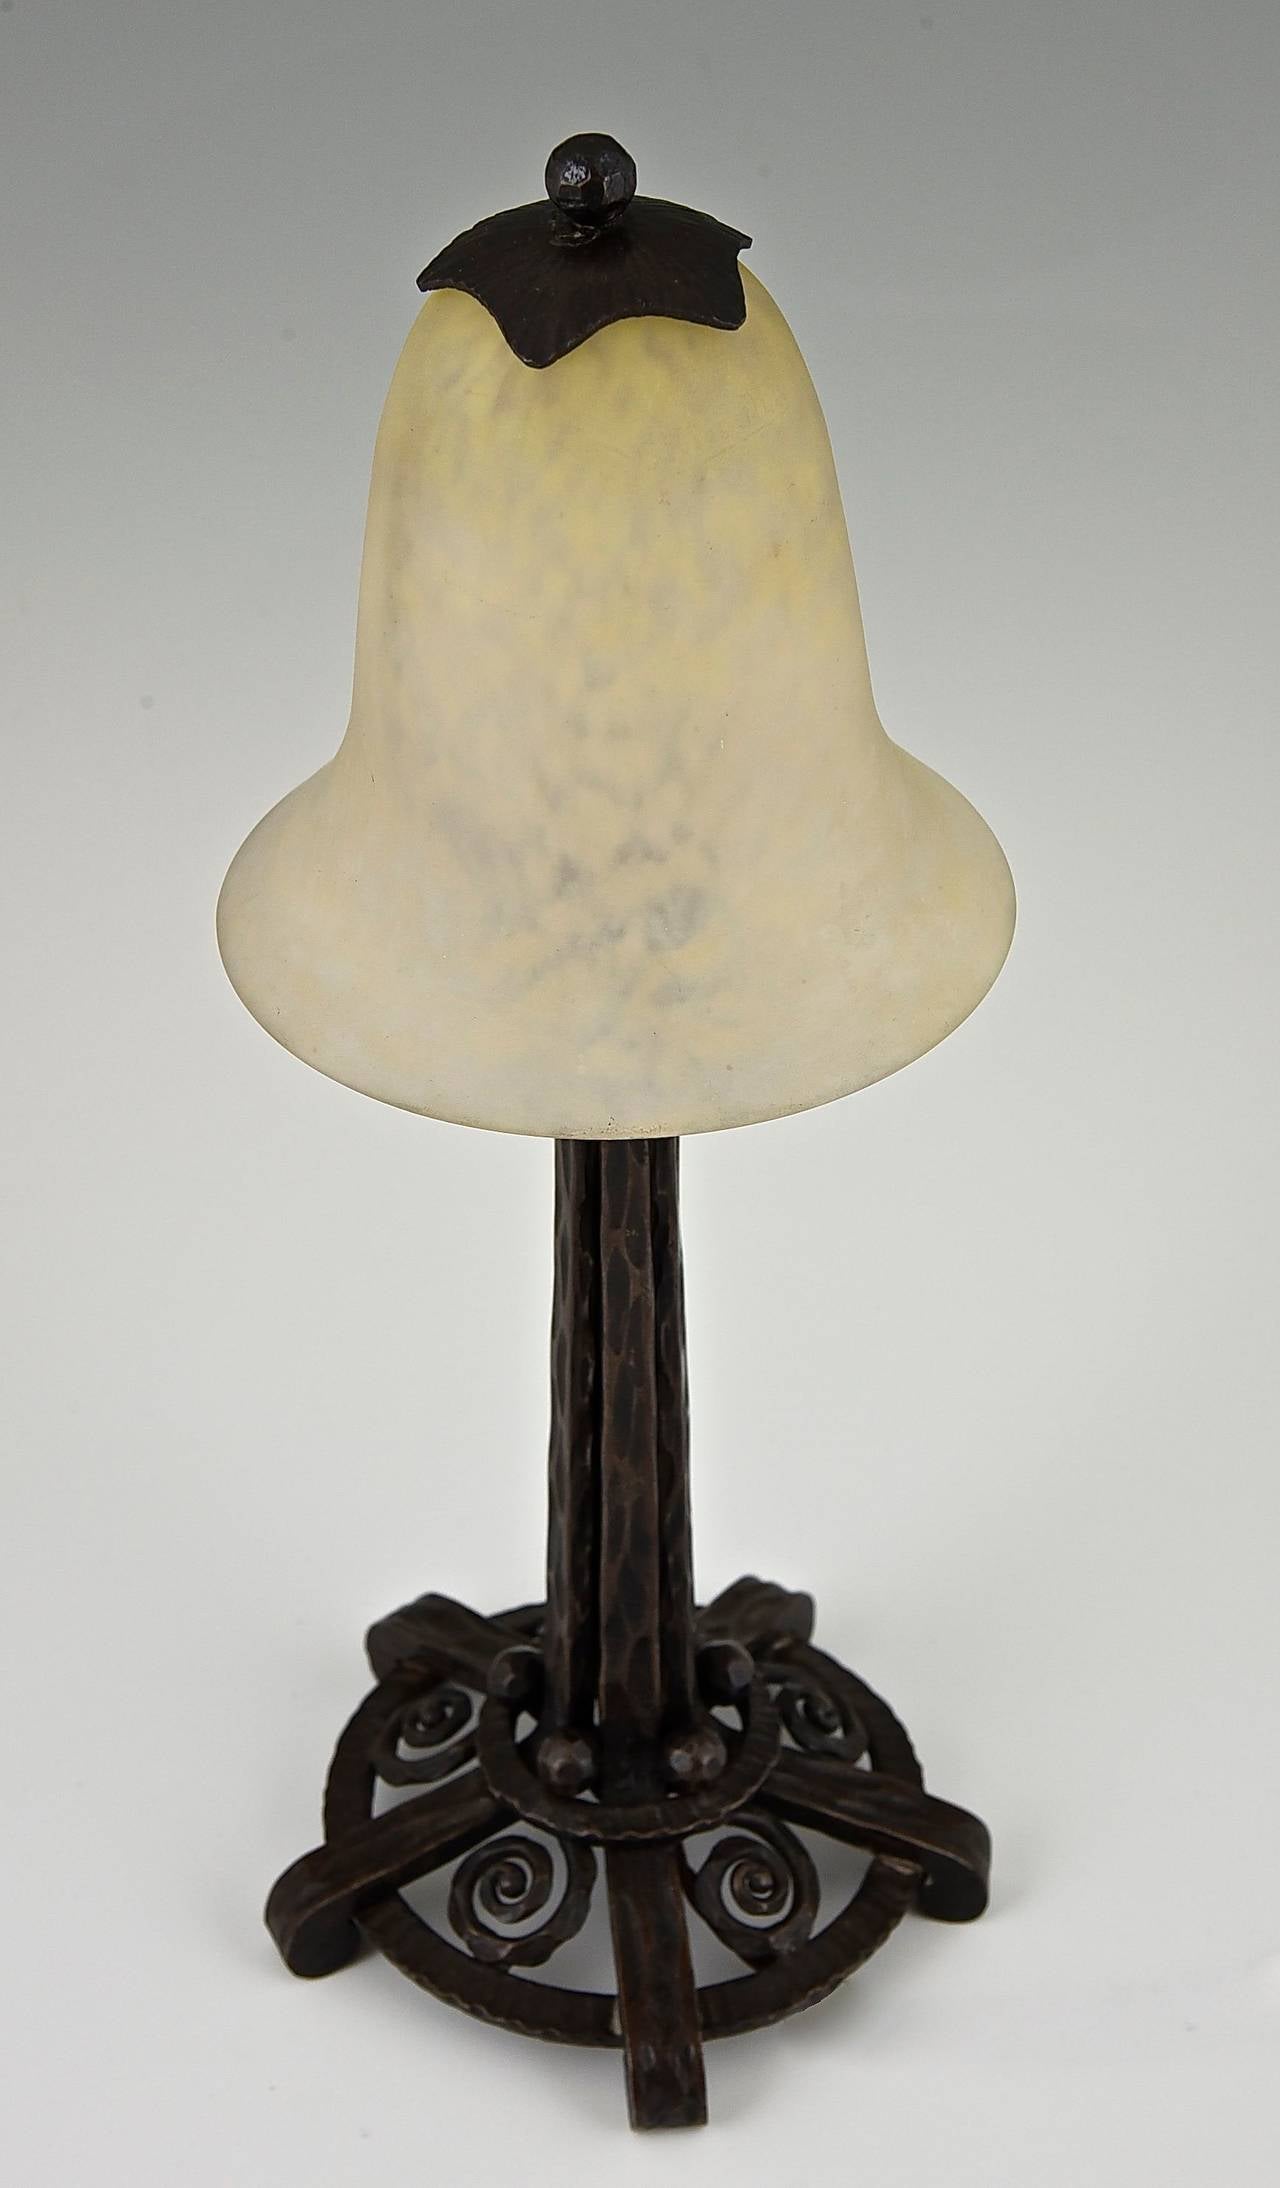 Belgian Art Deco Wrought Iron and Glass Table Lamp by Schneider, 1924 France